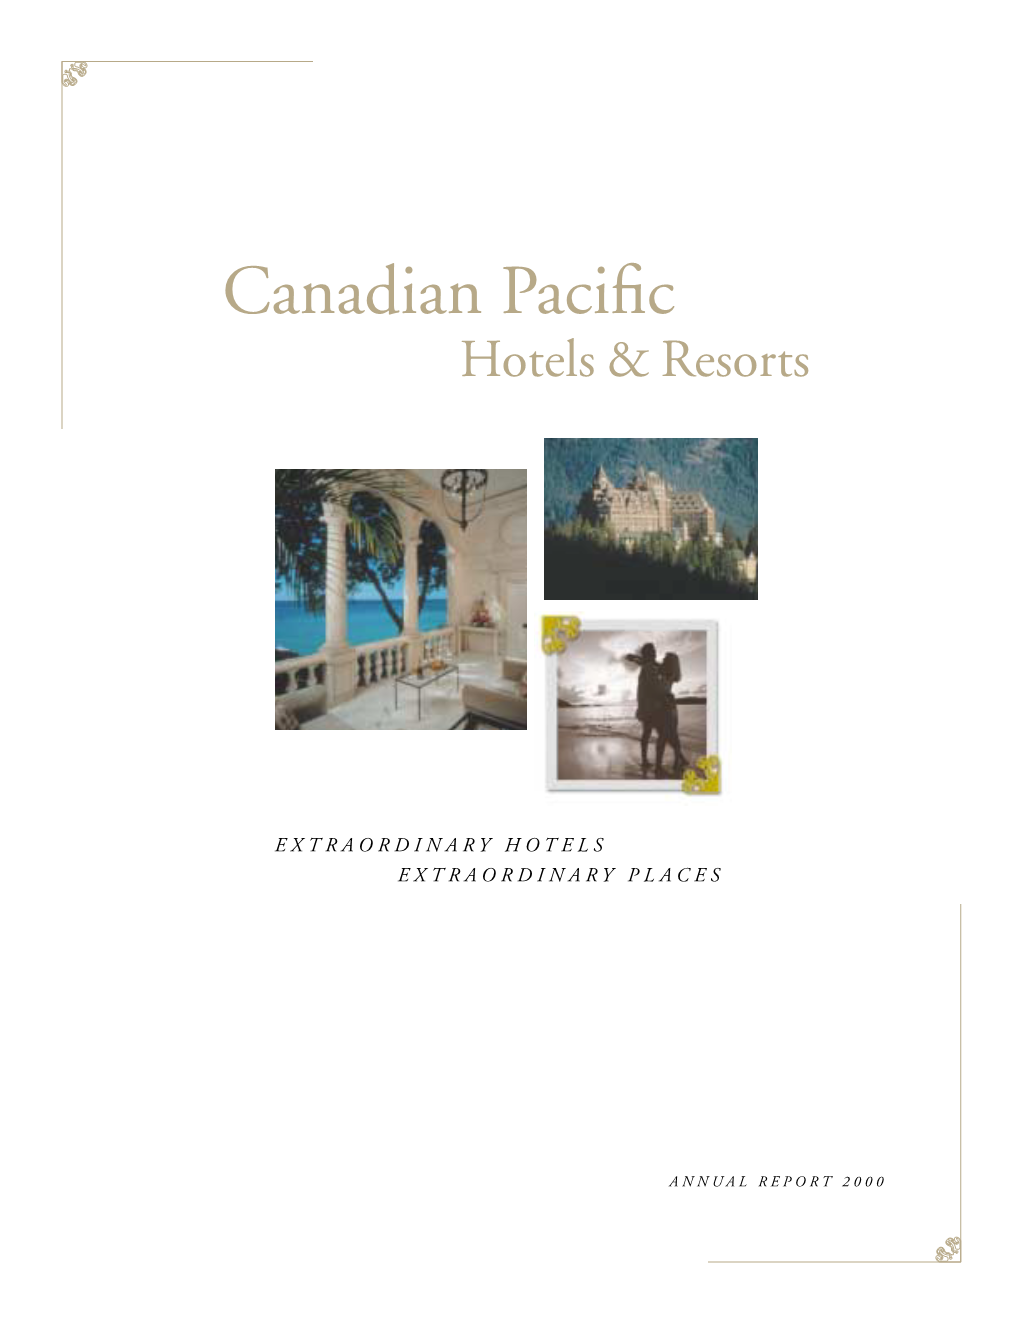 Canadian Pacific Hotels 2000 Annual Report